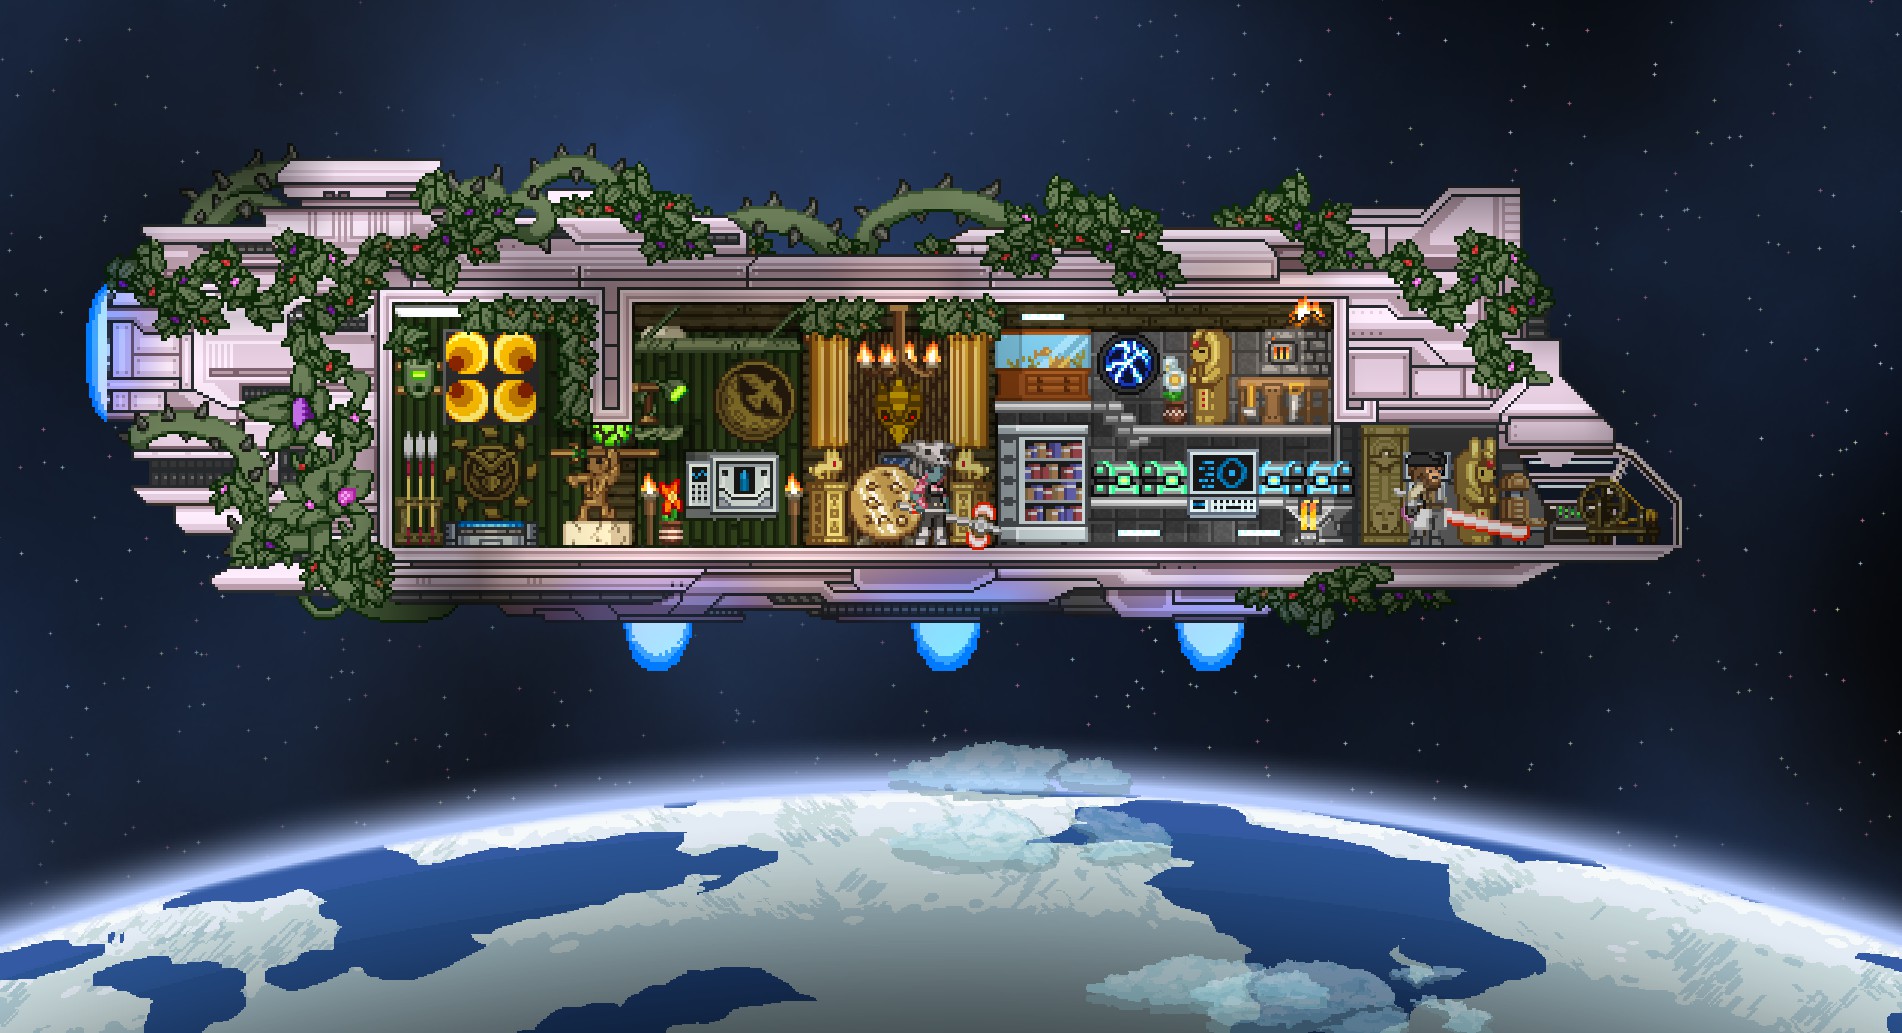 Building/Ship - Let's See Your Ship | Chucklefish Forums